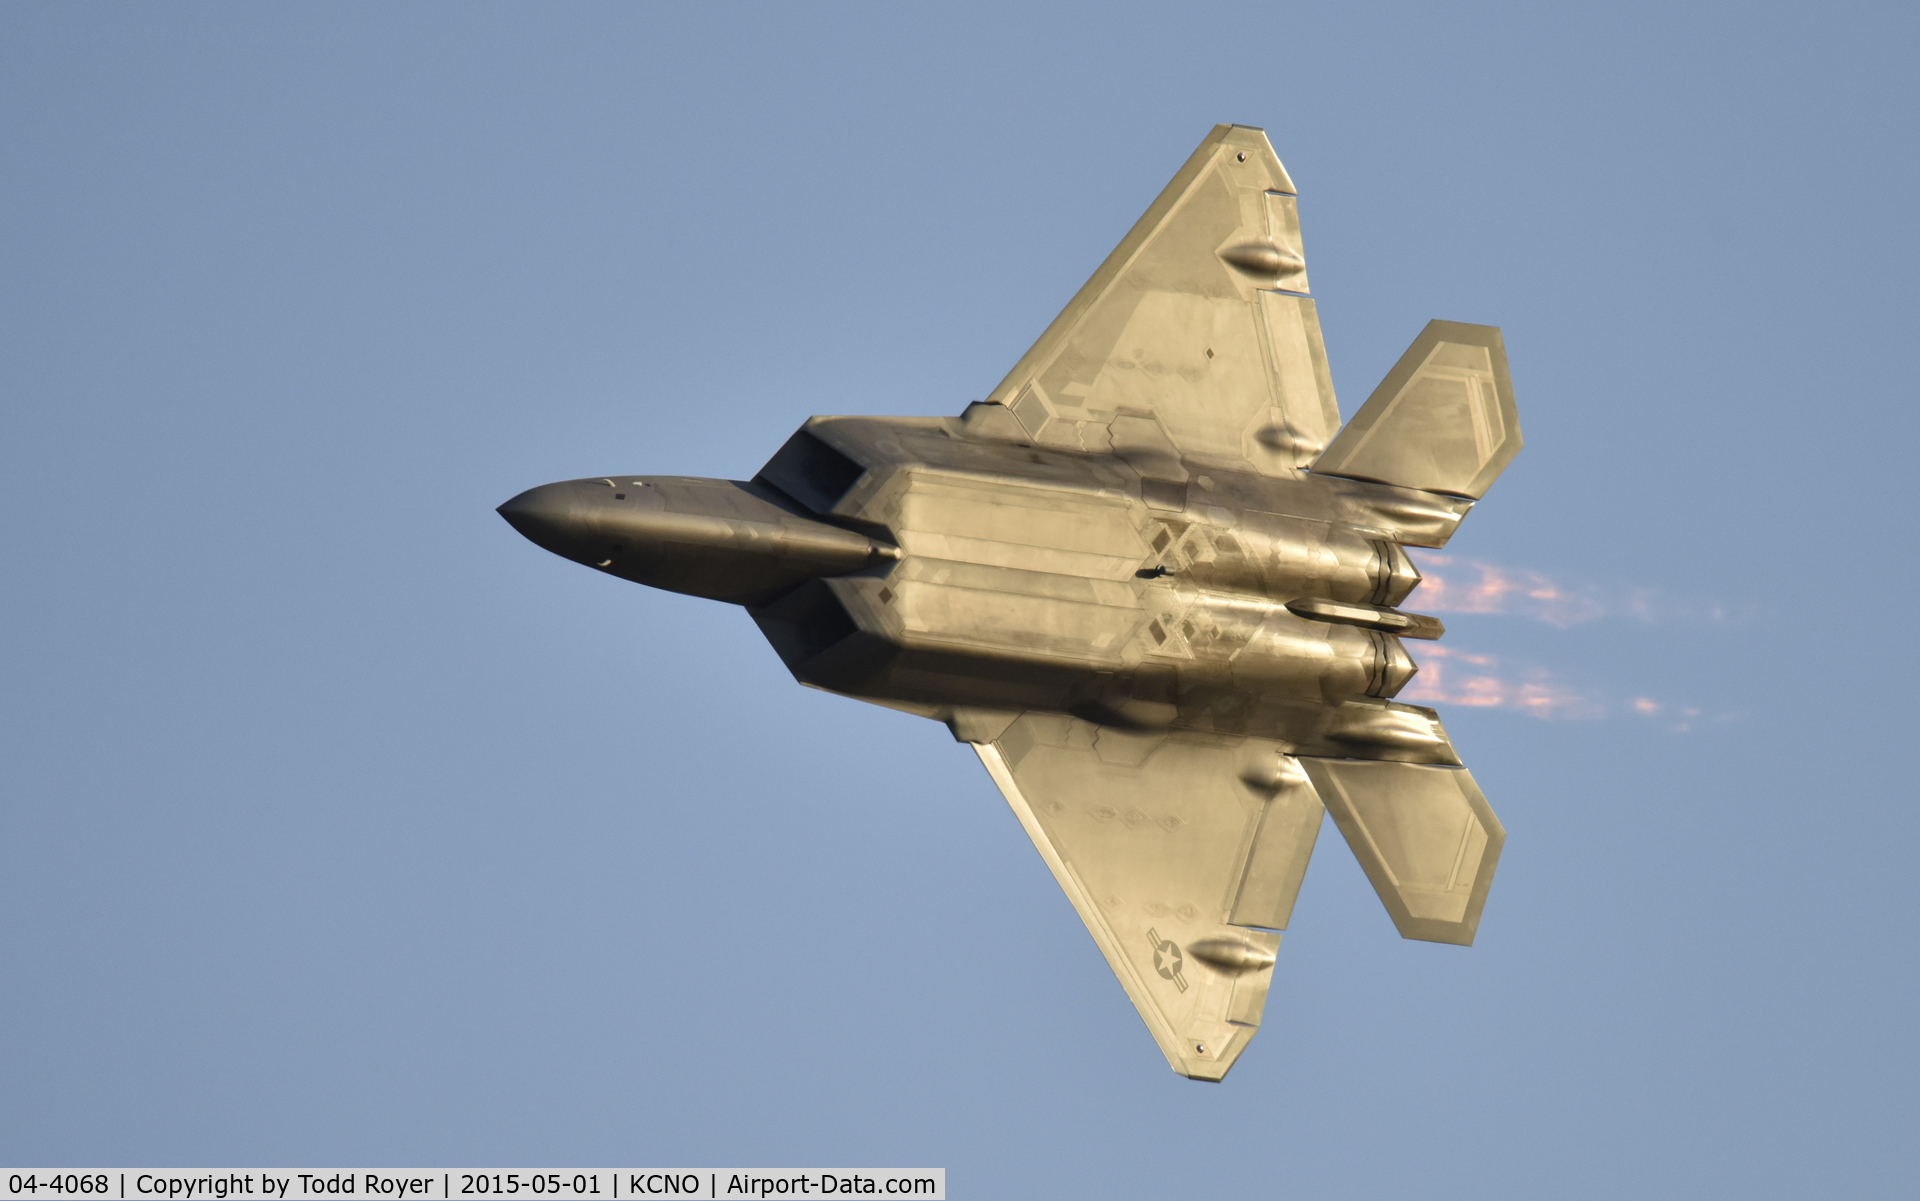 04-4068, 2004 Lockheed Martin F-22A Raptor C/N 4068, Flying at the 2015 Planes of Fame Airshow